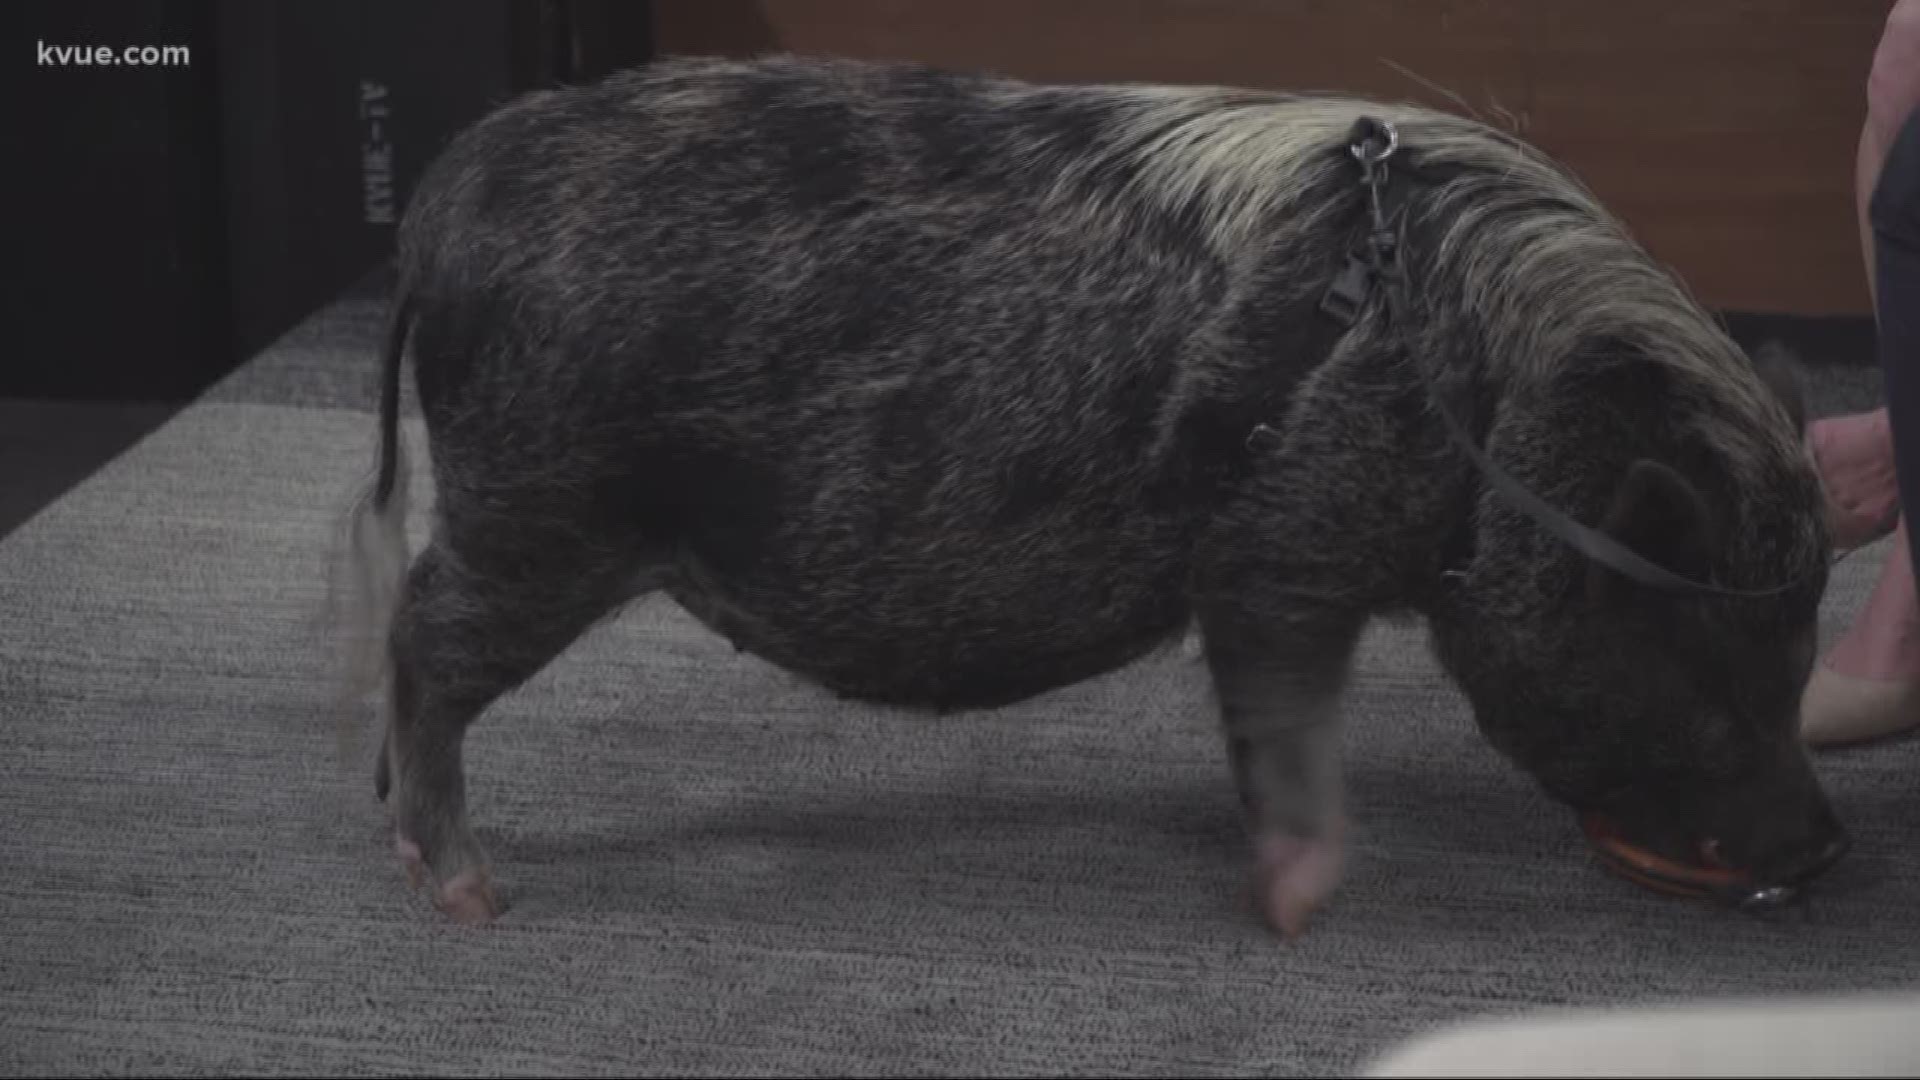 The Central Texas Pig Rescue has plenty of pigs looking for a good home.